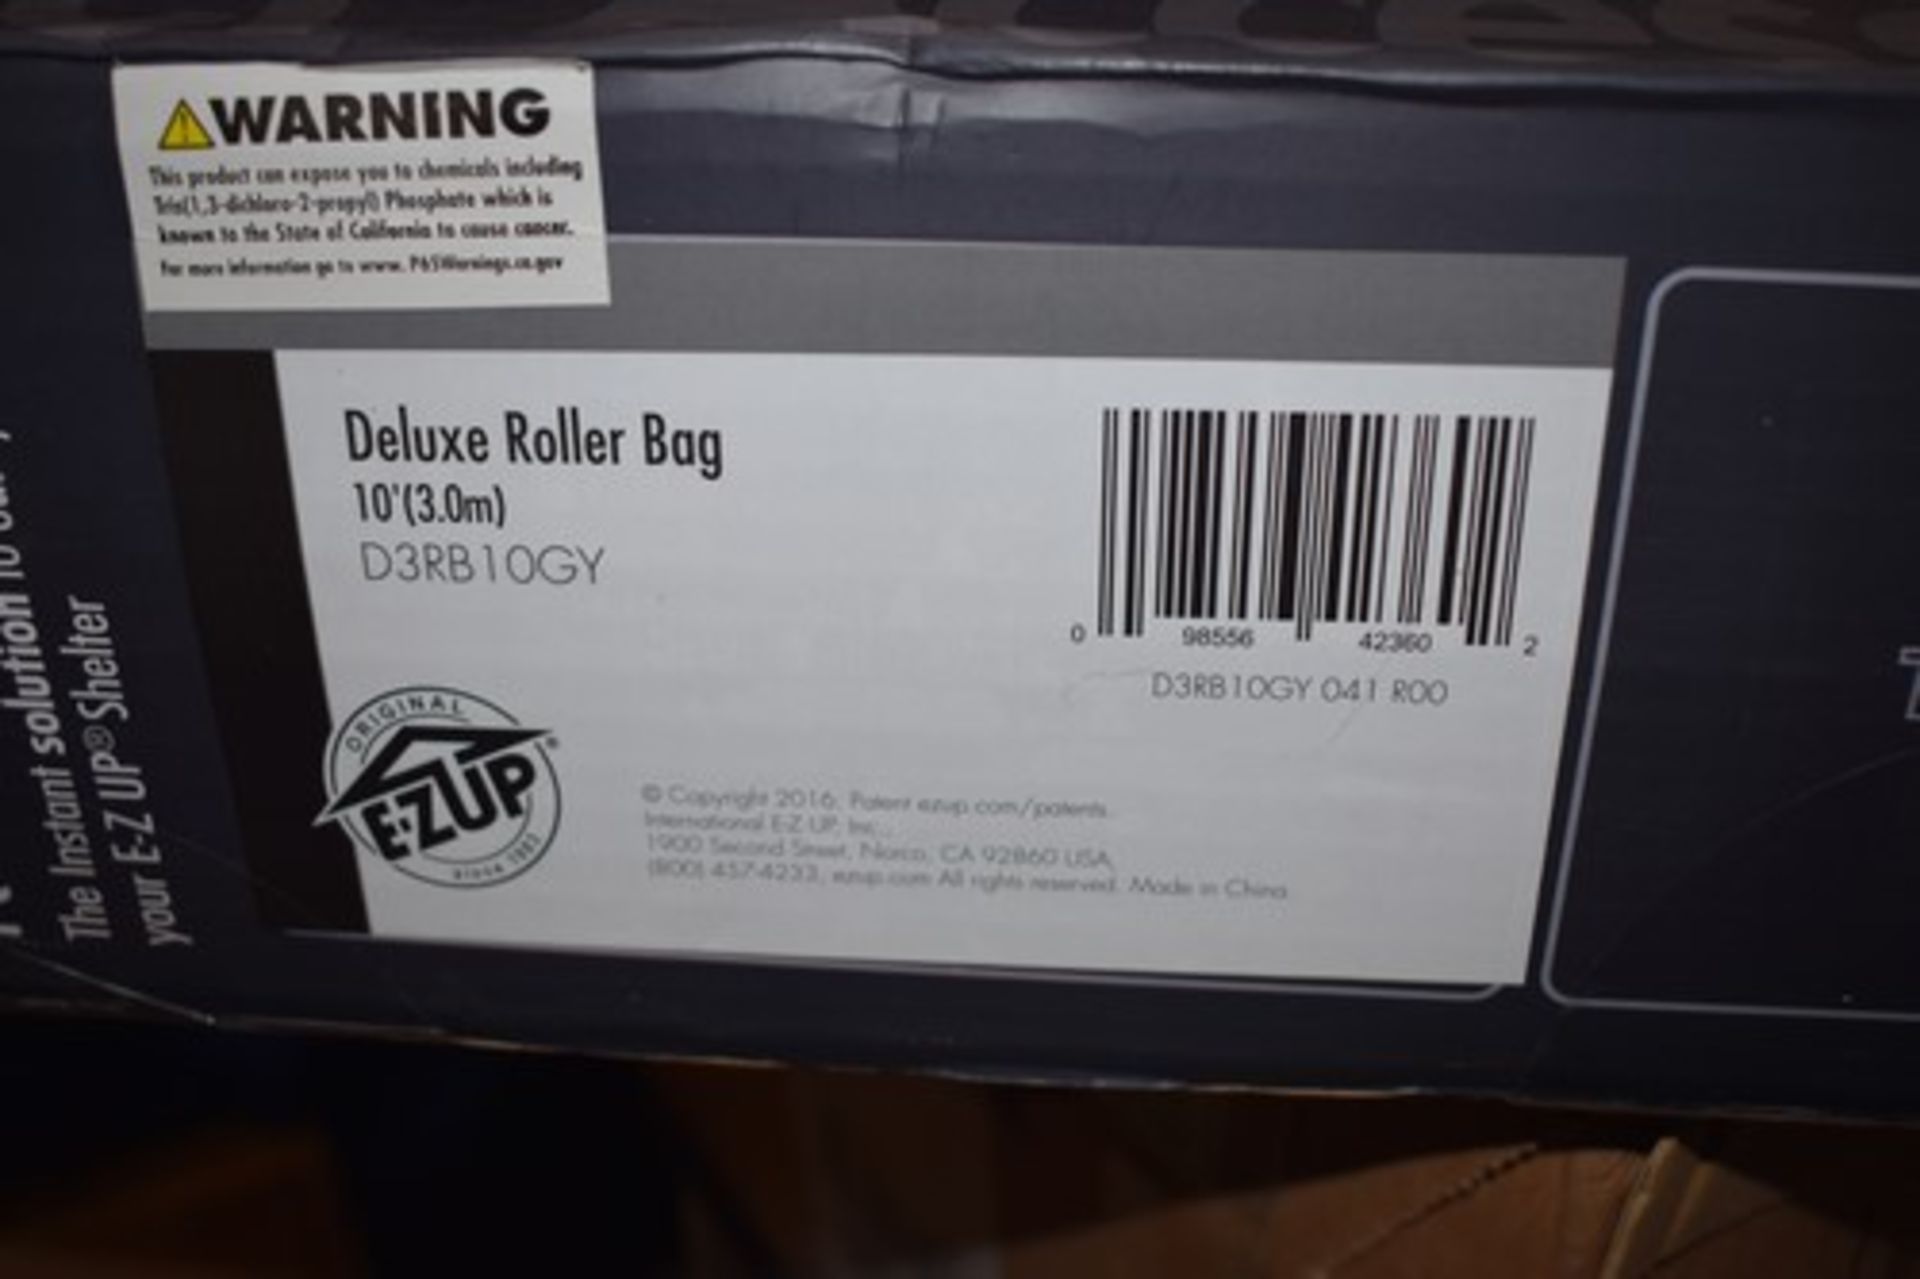 1 x Ezup deluxe 3.0m roller bag, code: D3RB10GY, EAN: 098556423602 - new in box (ES16) - Image 2 of 2